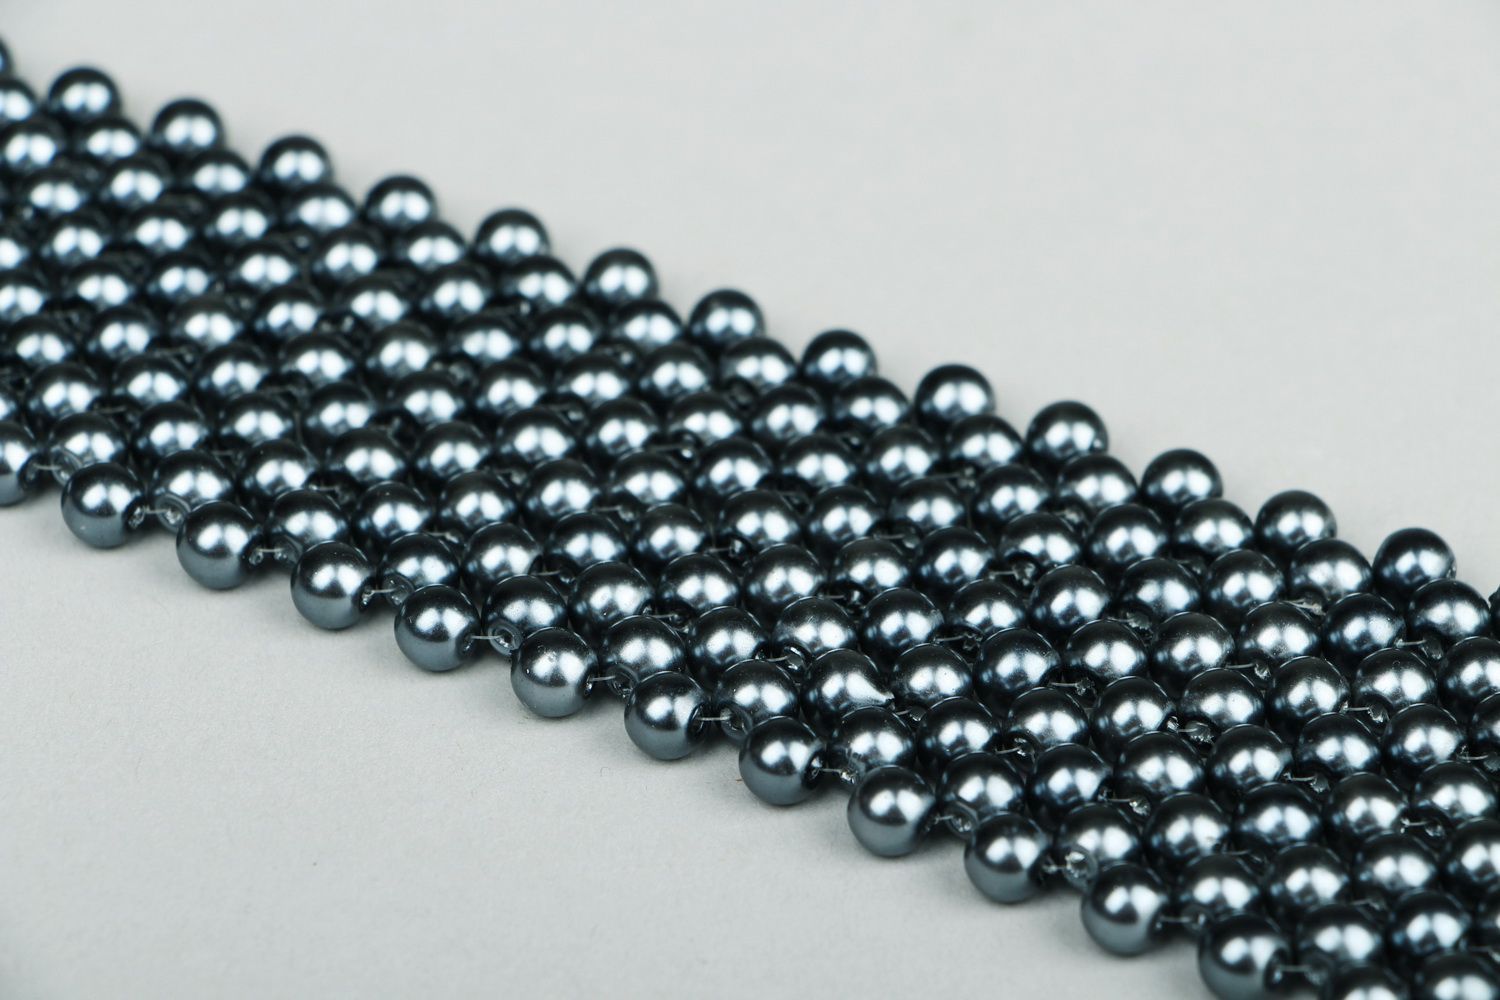 Tie made of artificial pearls photo 3